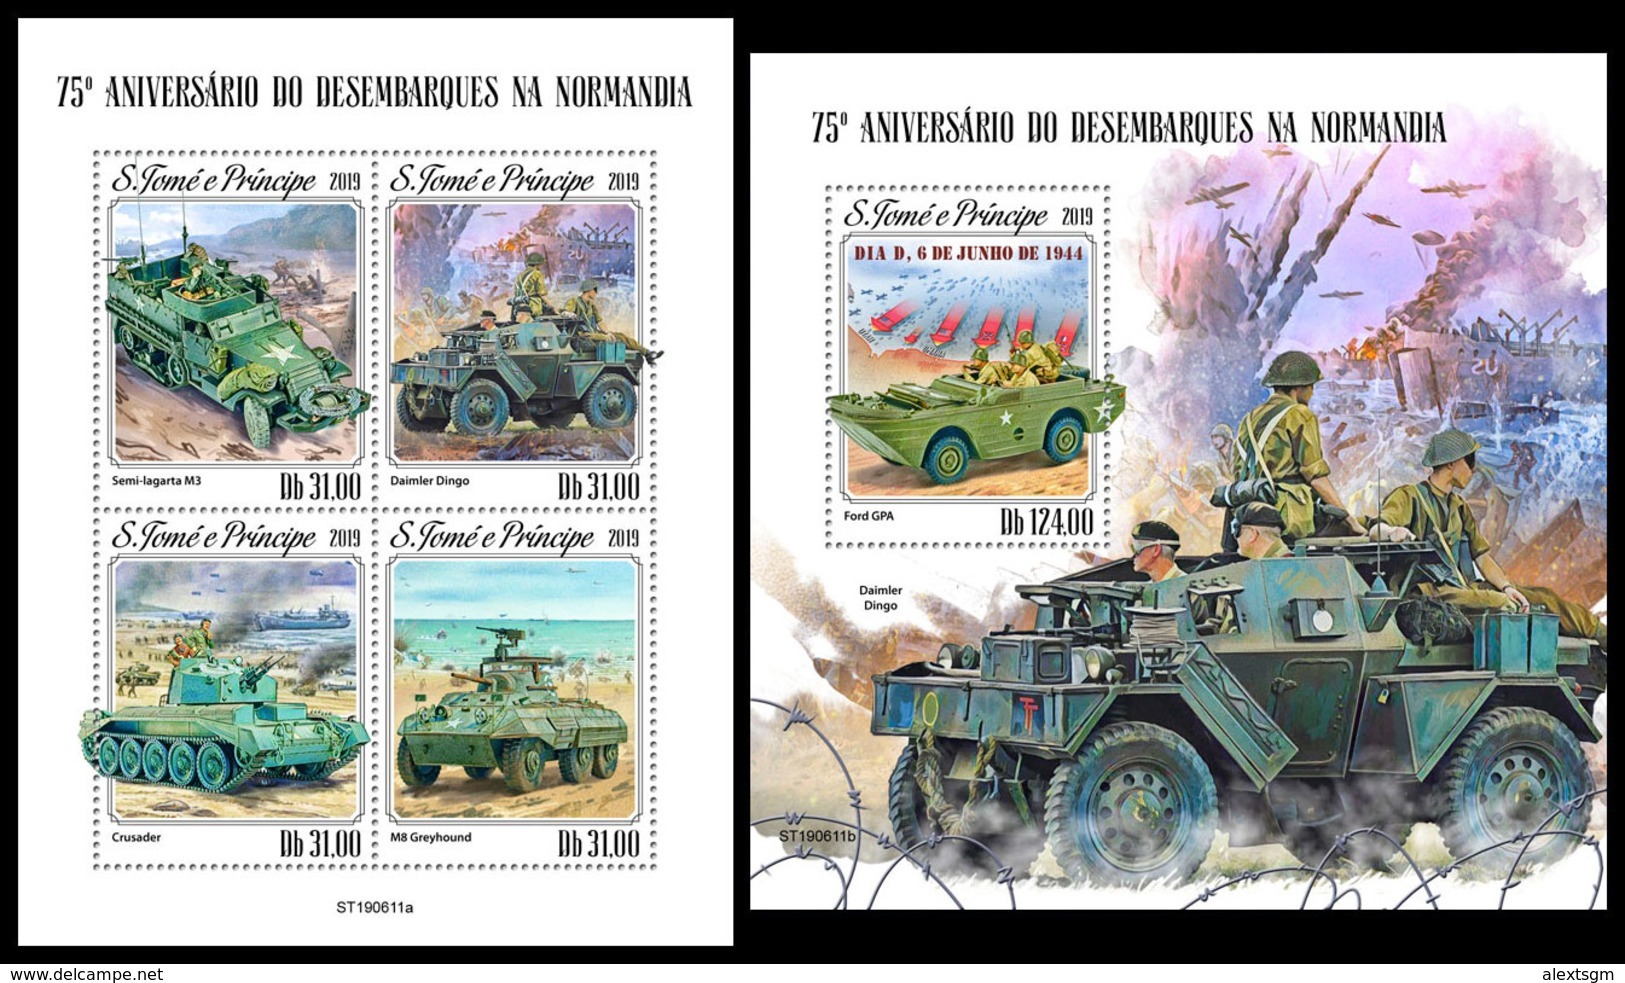 S. TOME & PRINCIPE 2019 - World War 2: Normandy. M/S + S/S Official Issue [ST190611] - Sao Tome En Principe